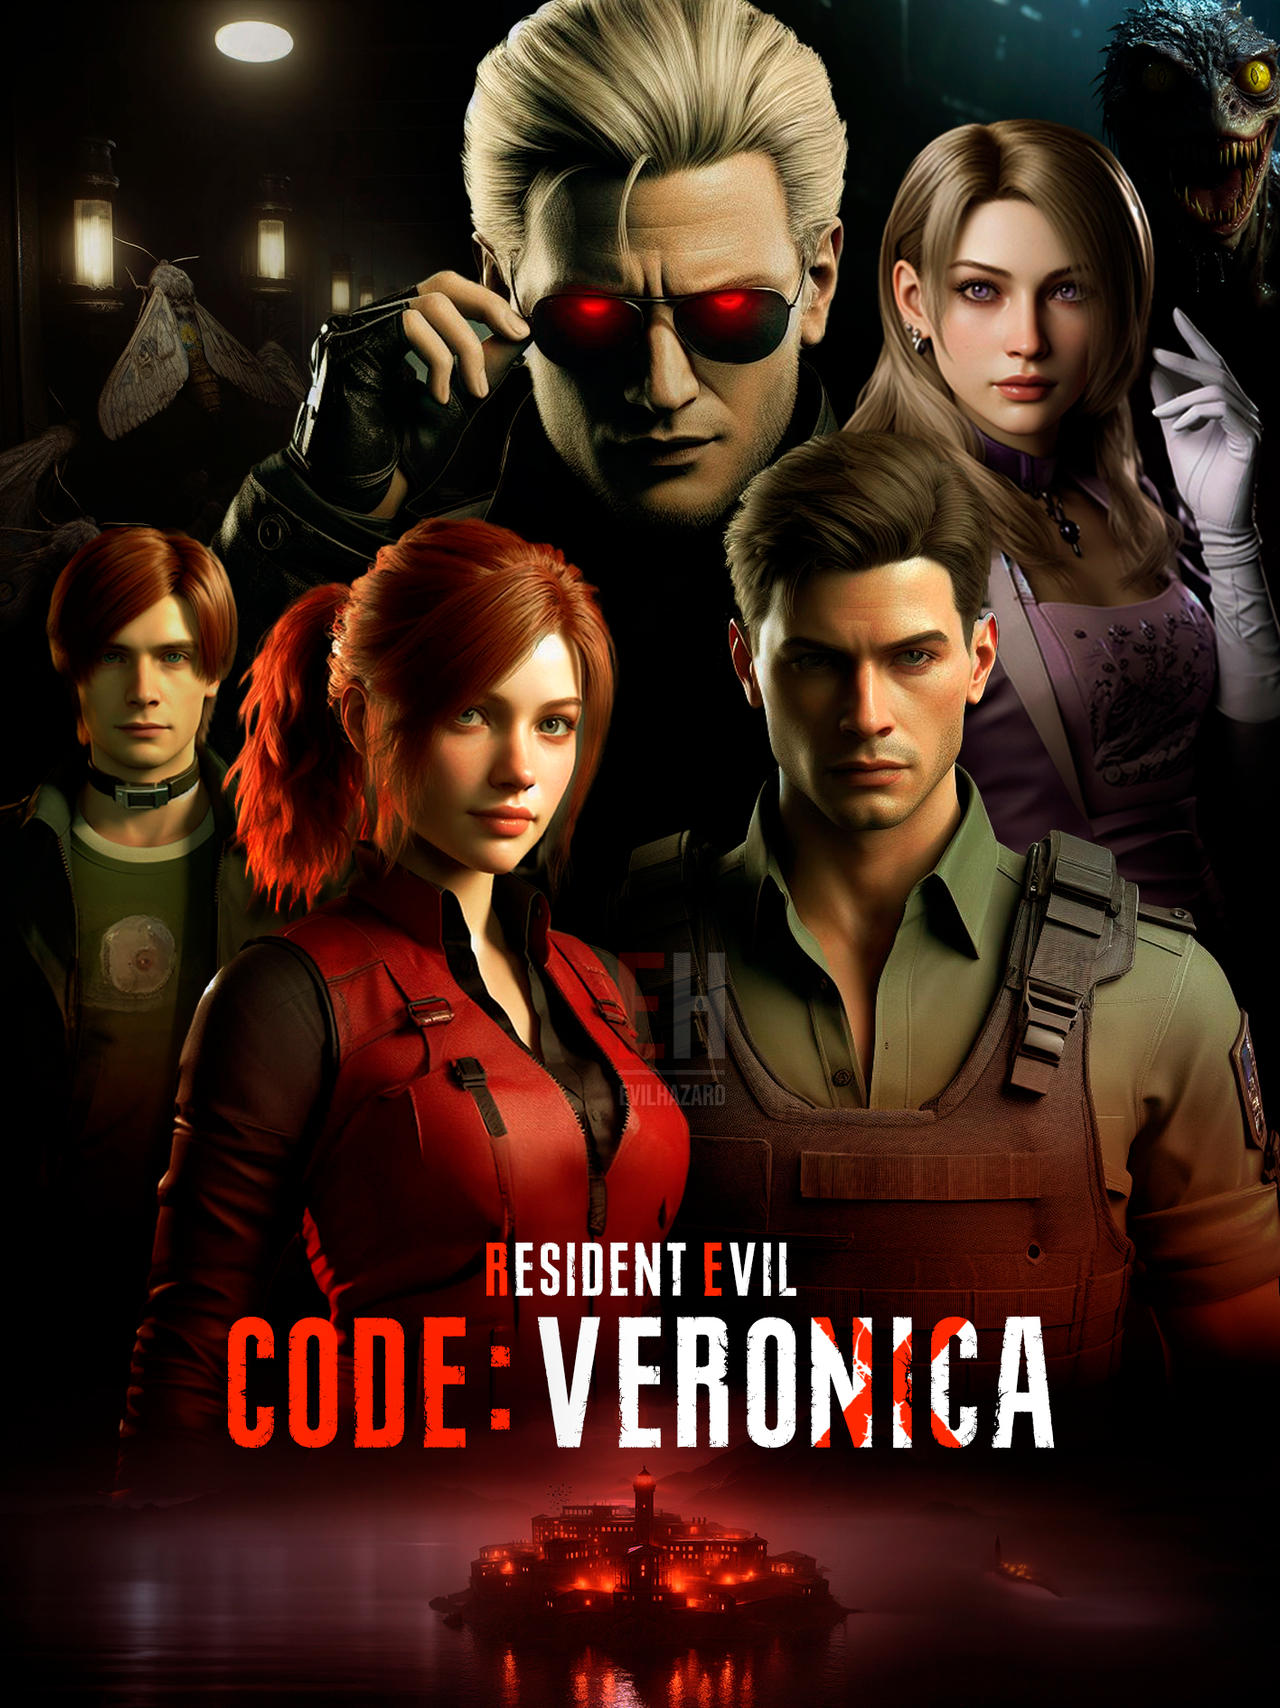 Why Resident Evil 1 and Code Veronica should also get a remake